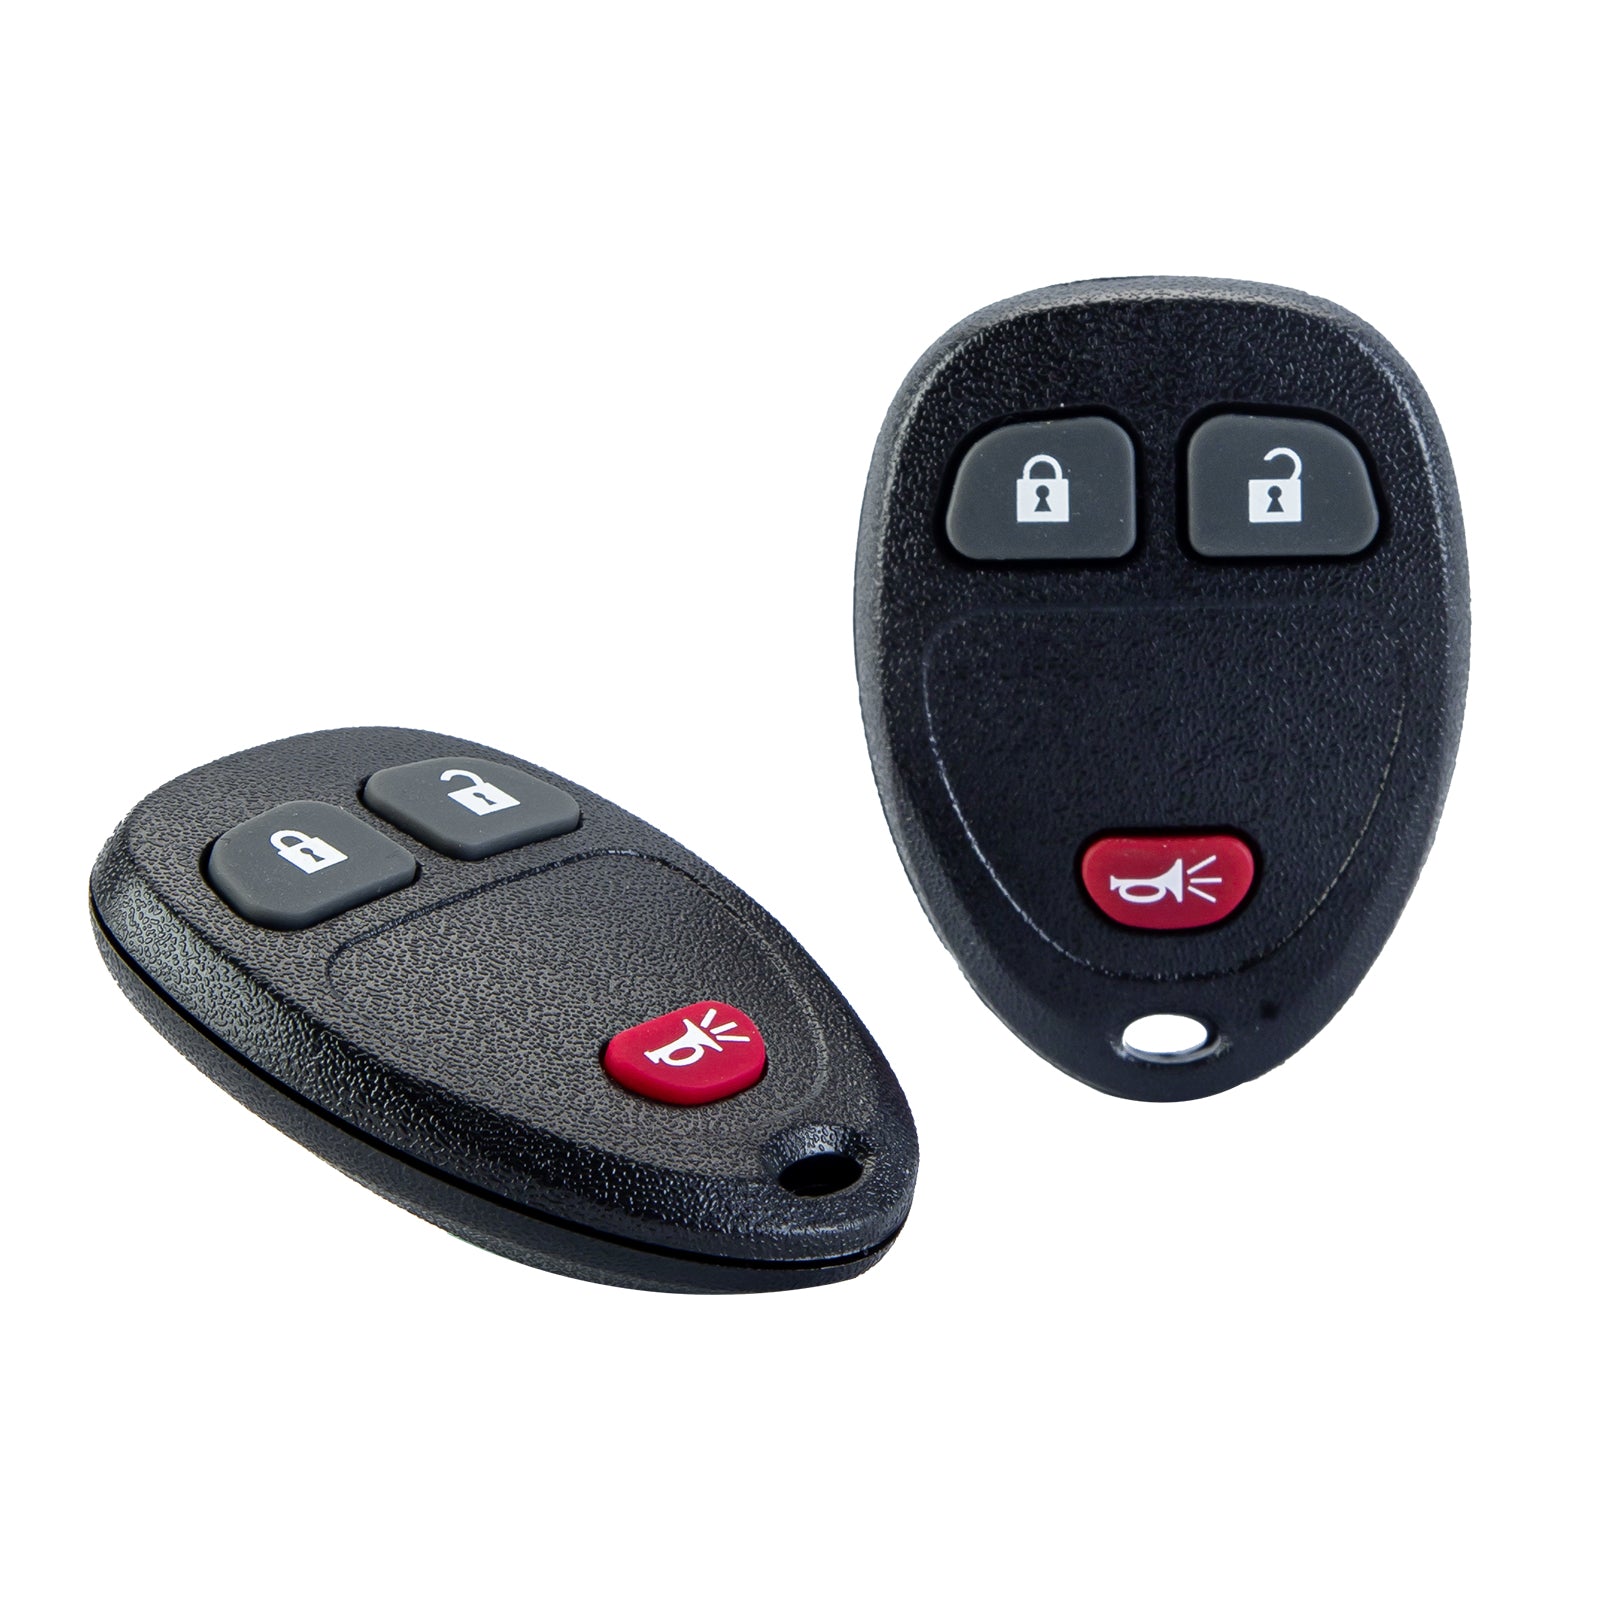 Car Key Fob Replacement for 2007-2009 Equinox 3 Button OUC60270, OUC60220